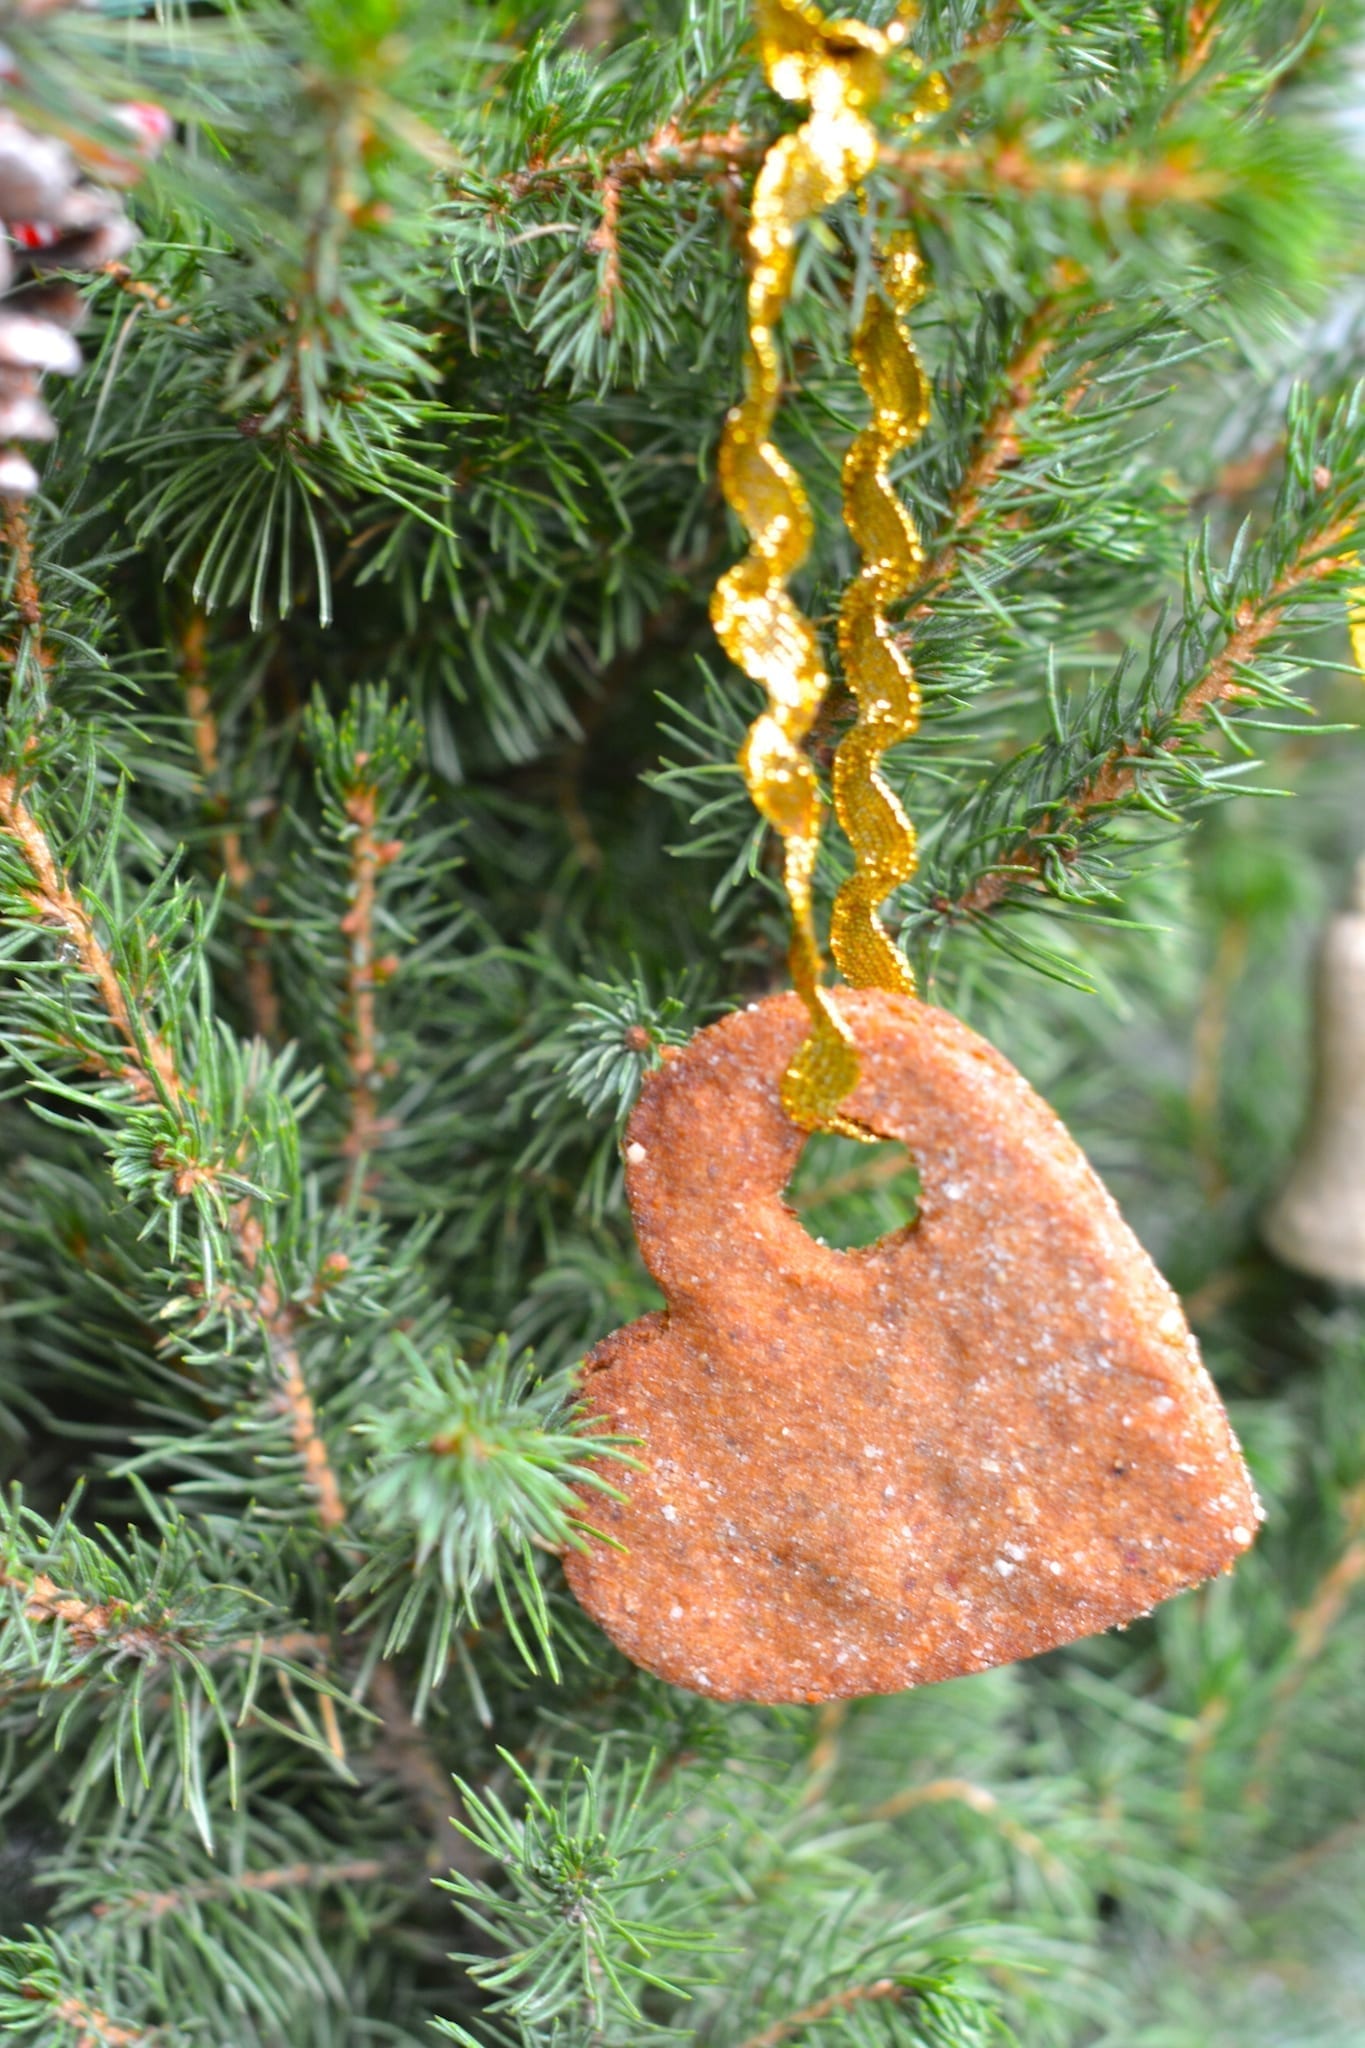 Whole Food Plant-Based Gingerbread Christmas Tree Adornment